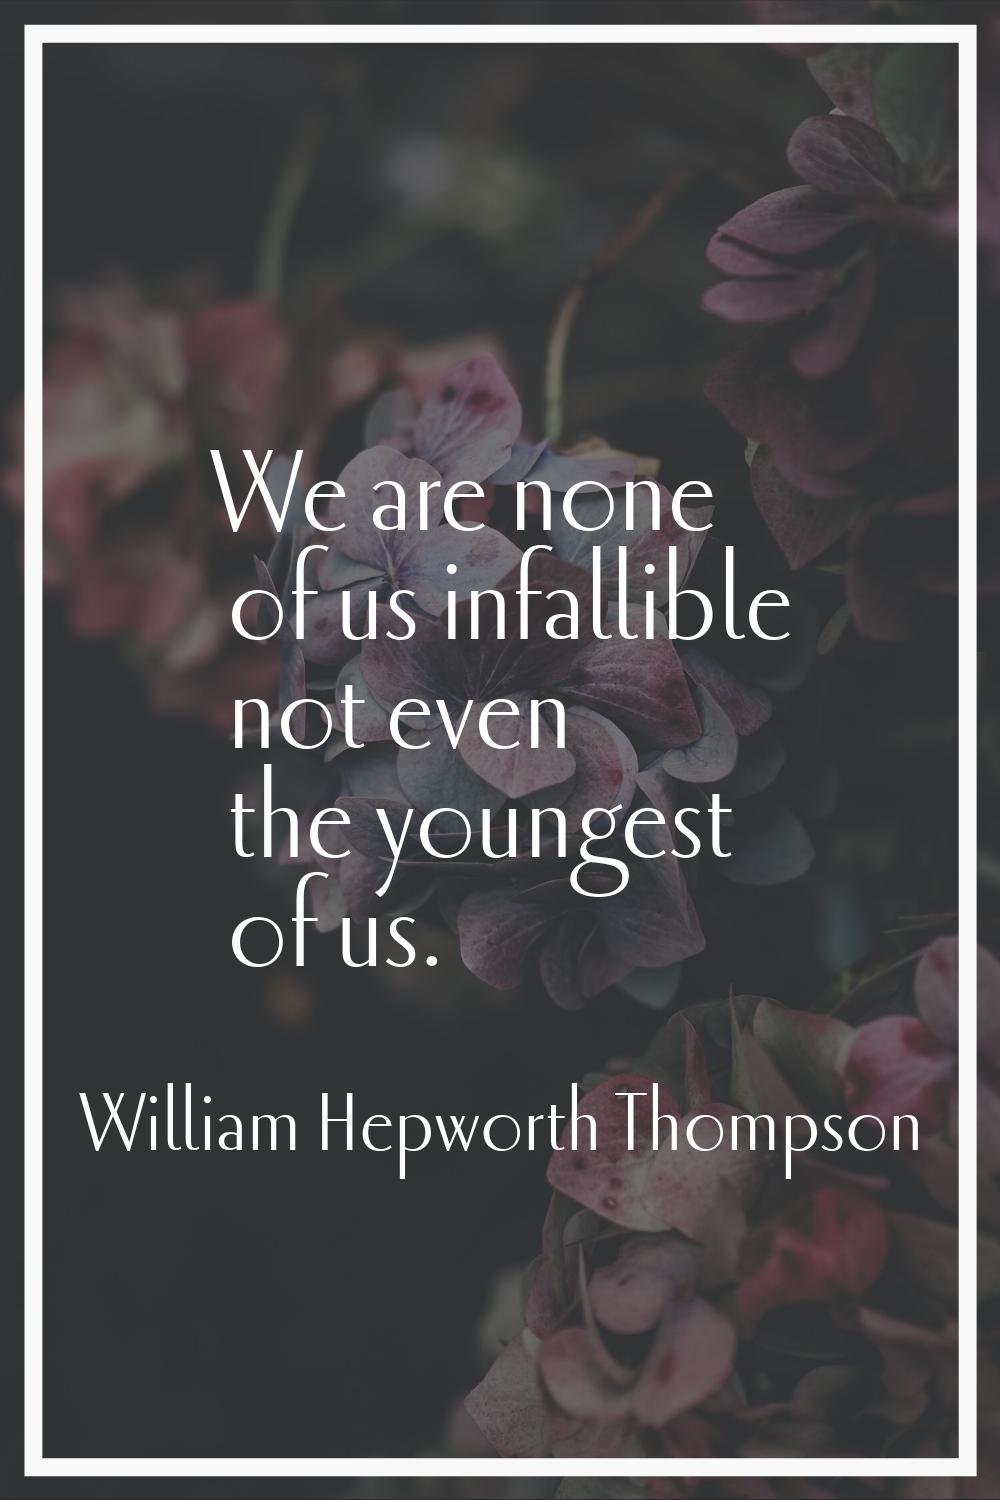 We are none of us infallible not even the youngest of us.